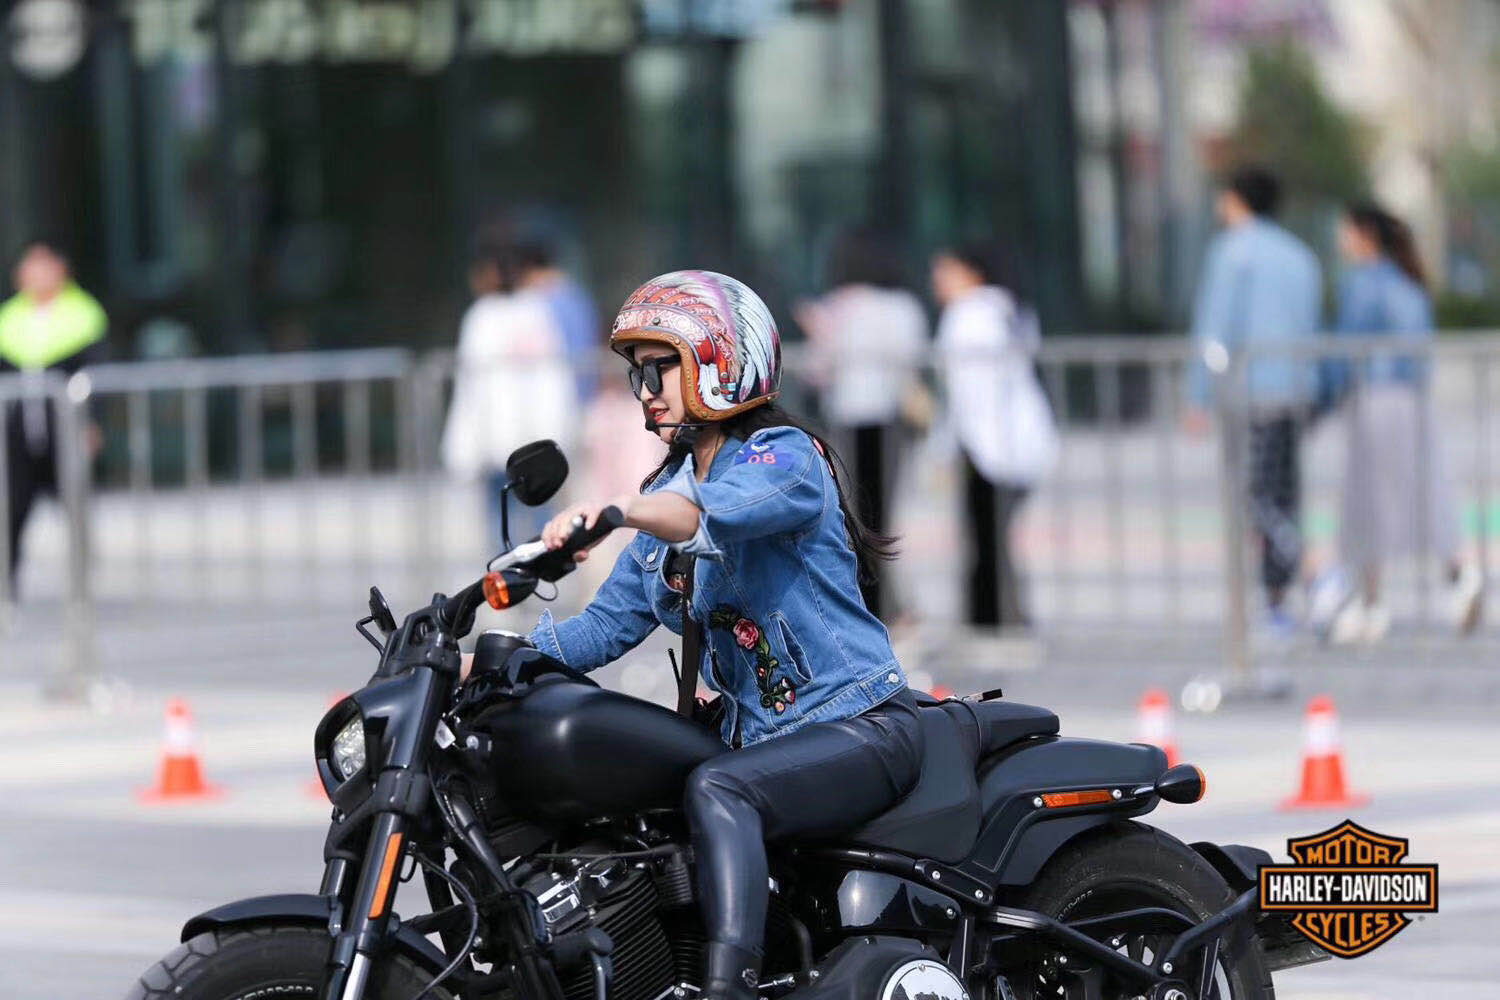 Exploring the Connection: Why Do Some Women Associate Motorcycle Riding with Freedom?